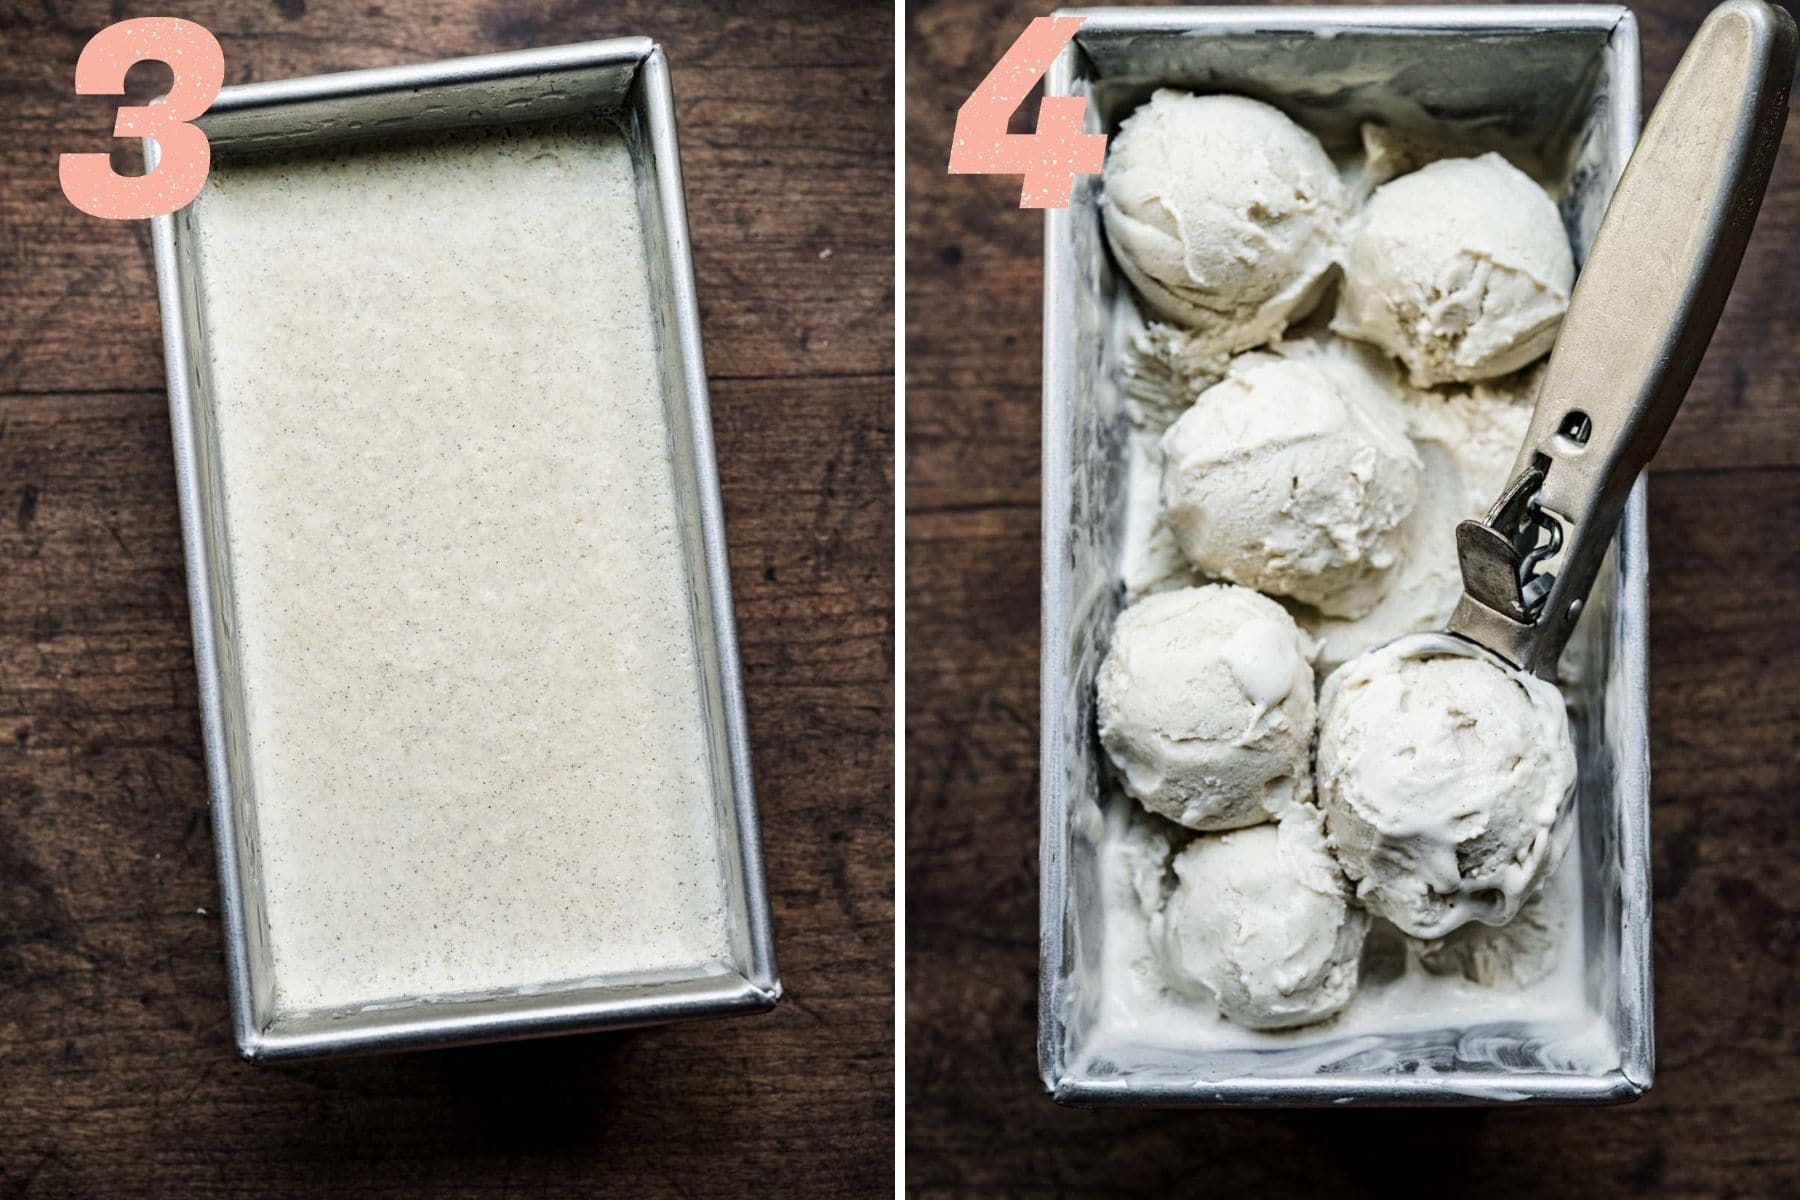 On the left: ice cream in pan after freezing. On the right: Ice cream balled into scoops in the pan.